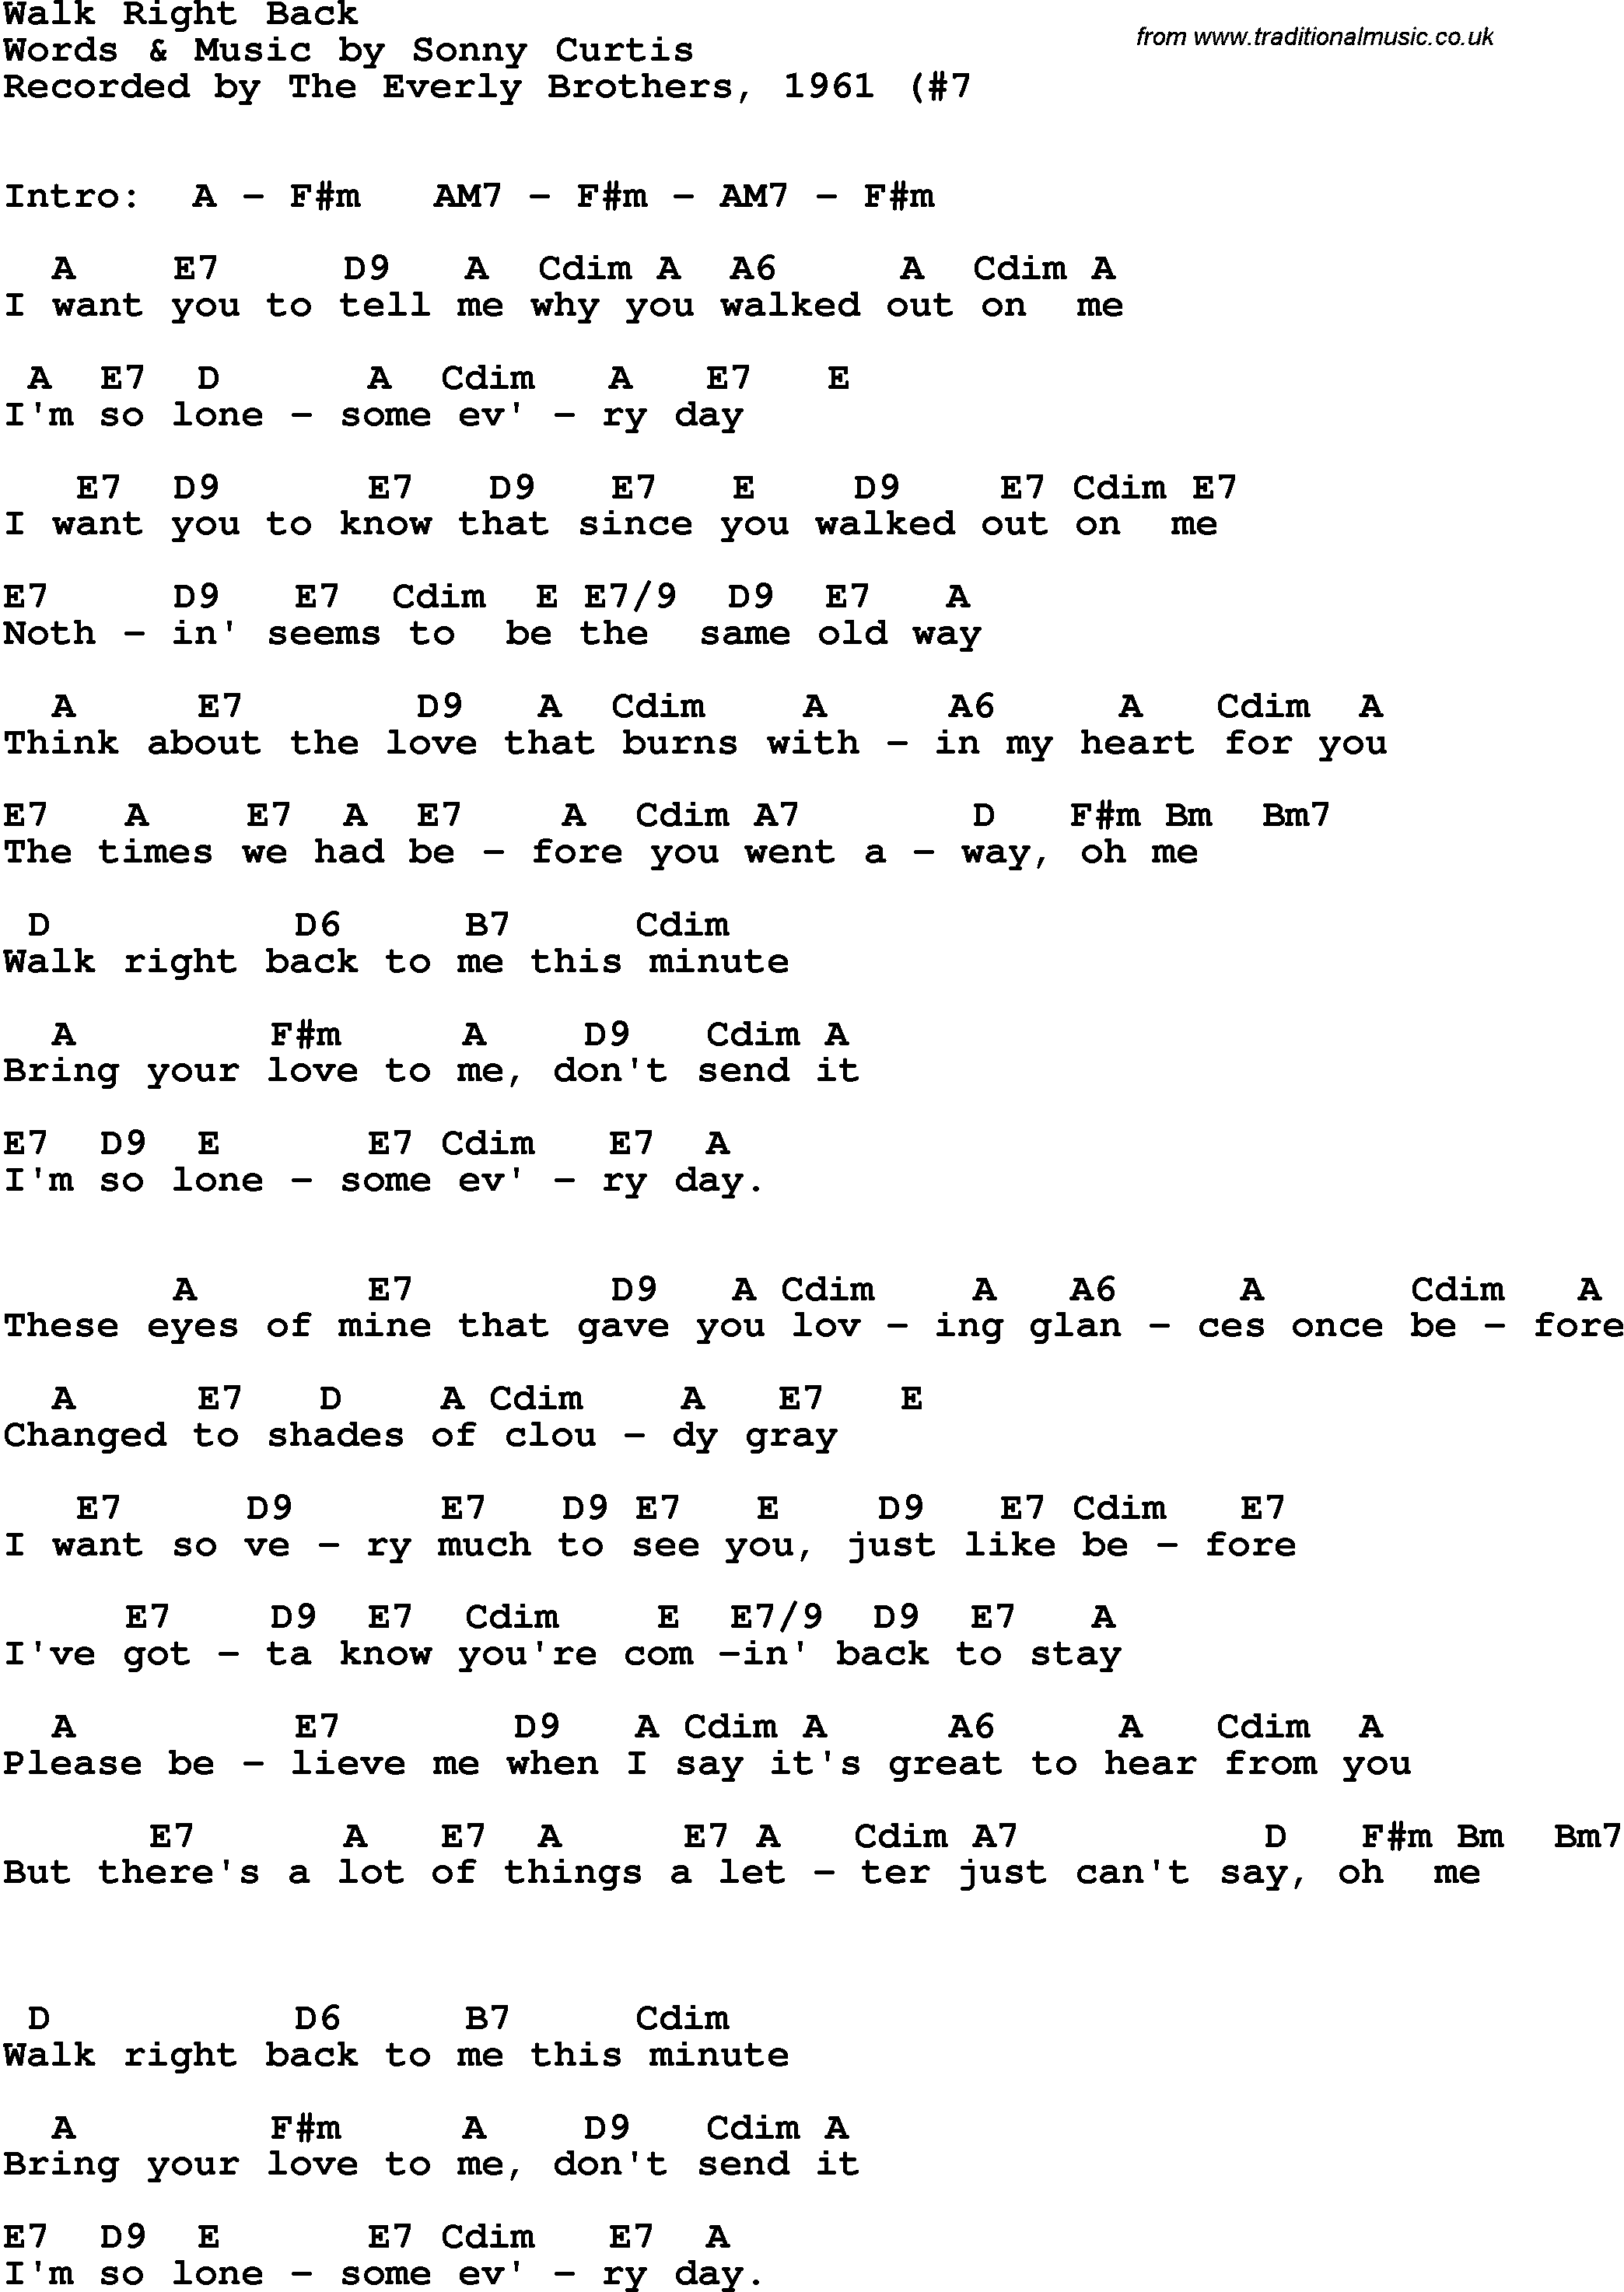 Song Lyrics with guitar chords for Walk Right Back - The Everly Brothers, 1961